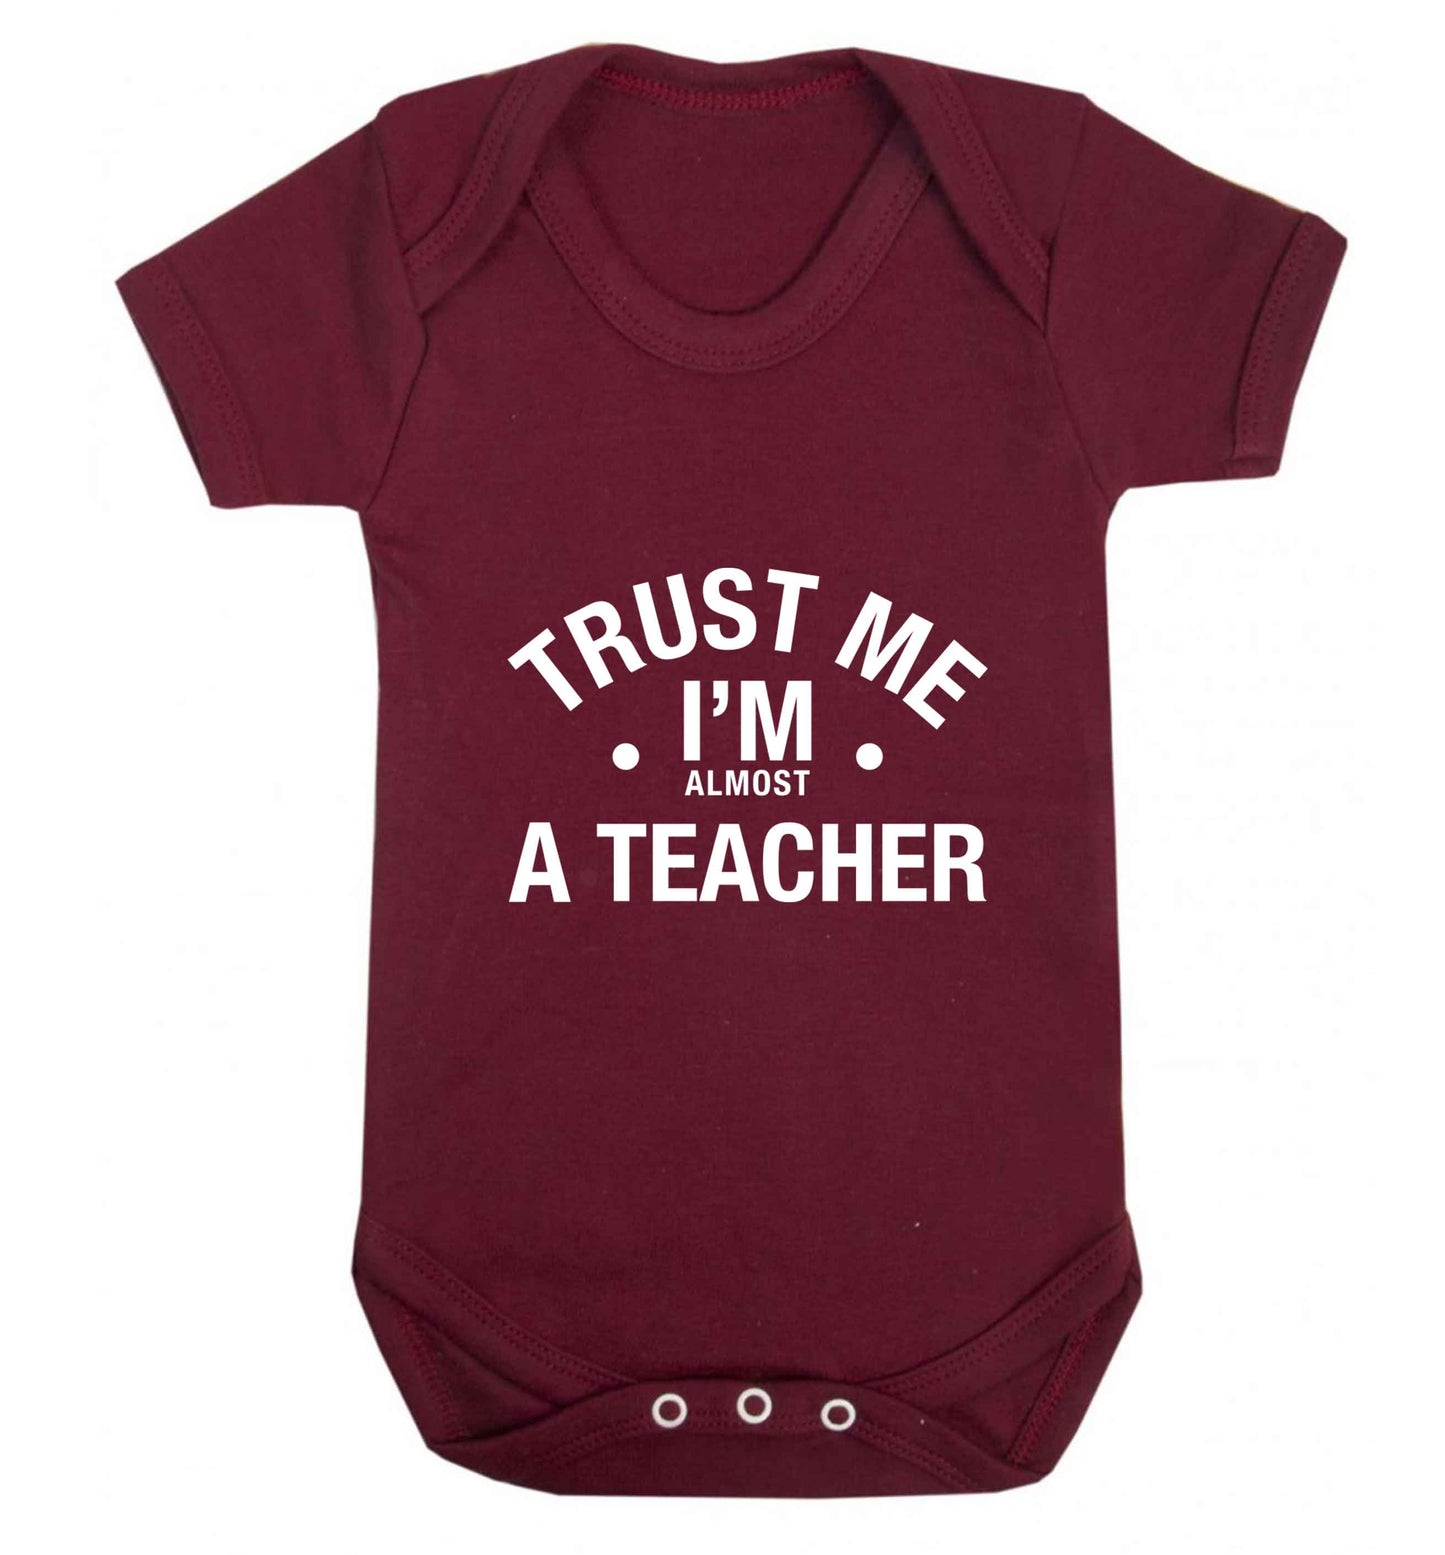 Trust me I'm almost a teacher baby vest maroon 18-24 months